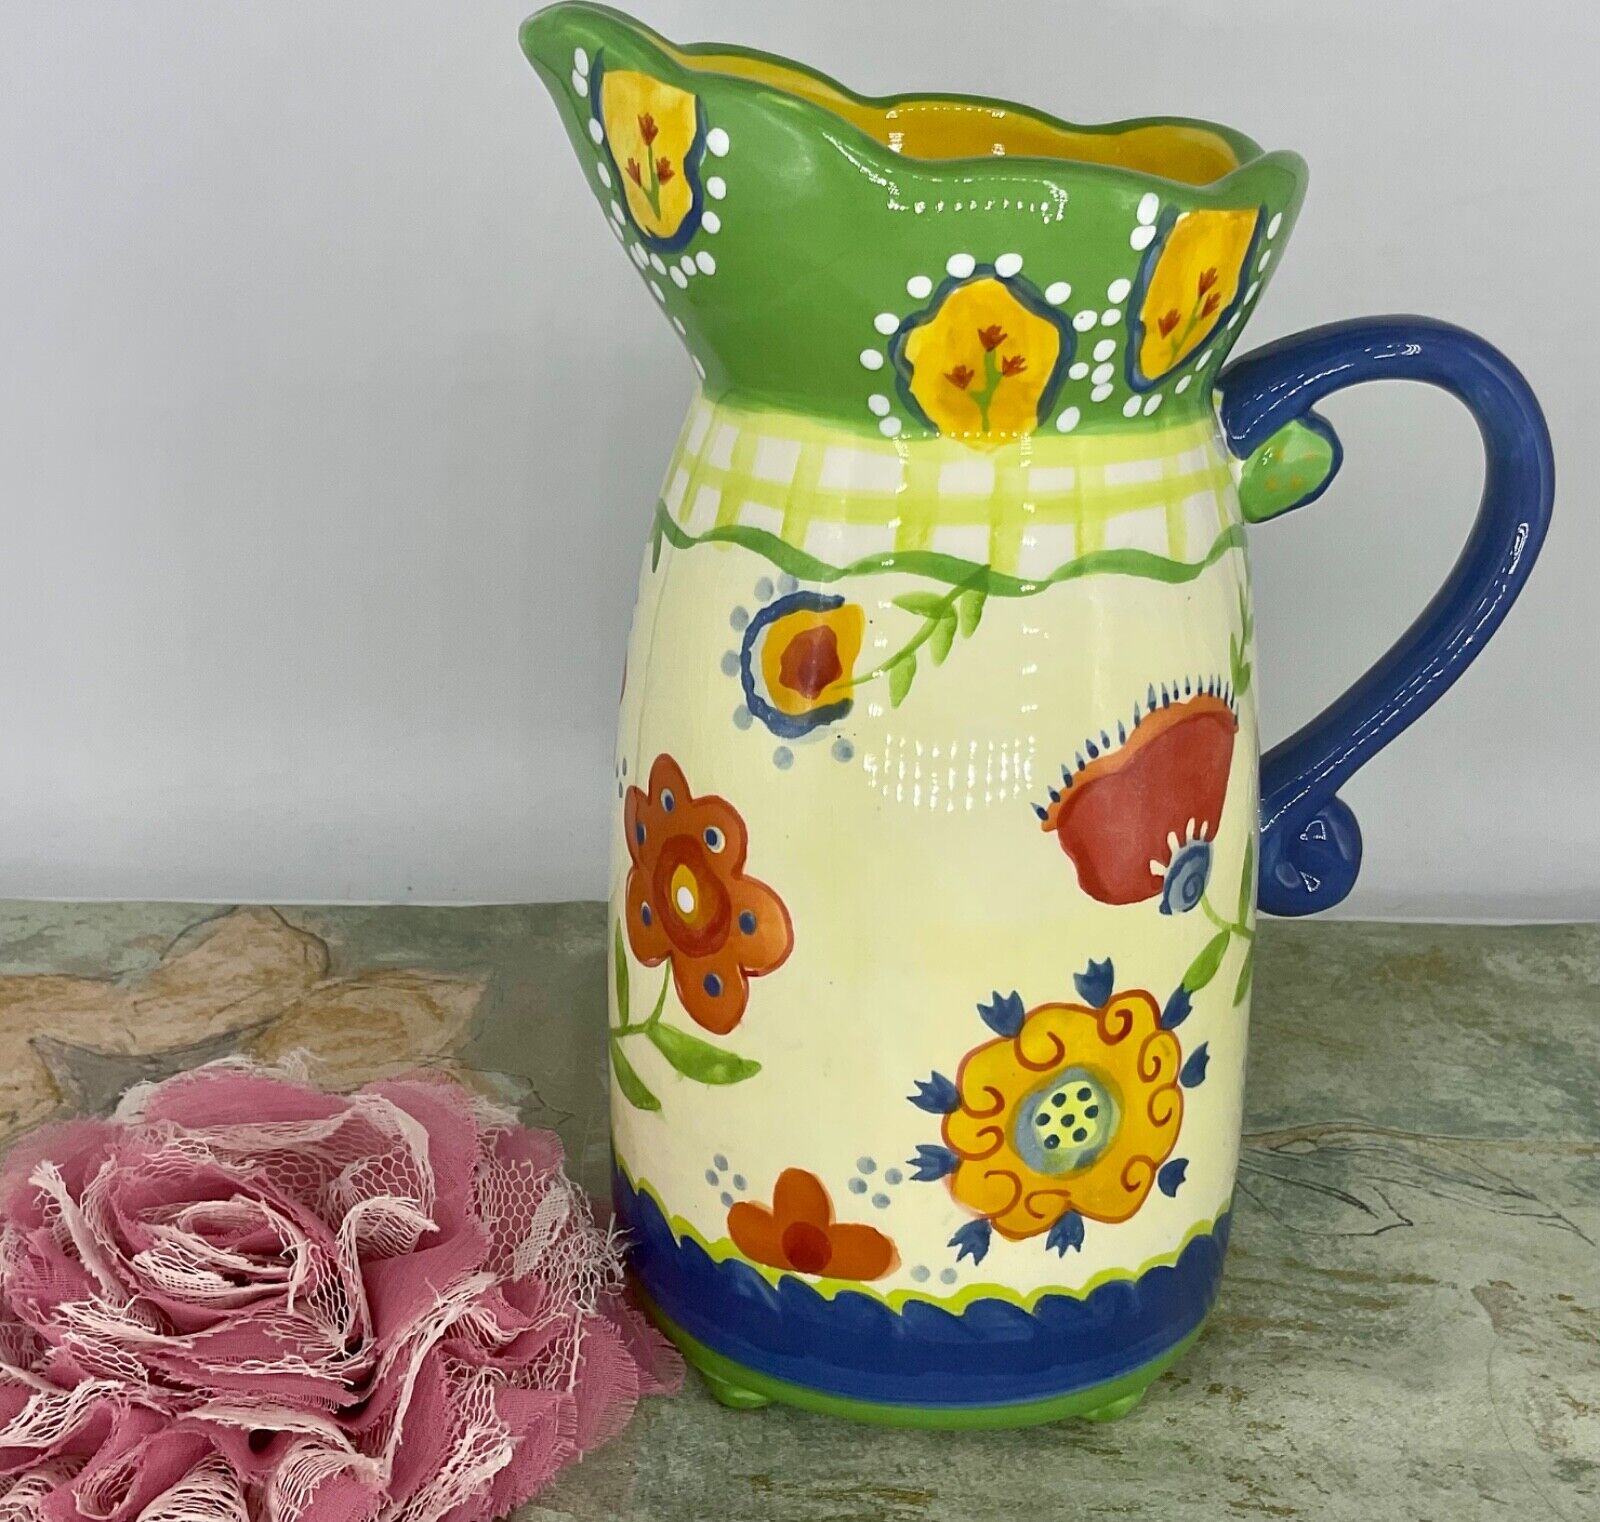 Ceramic Pitcher Flowers Kimberly Hodges Cupcakes & Cartwheels Colorful 